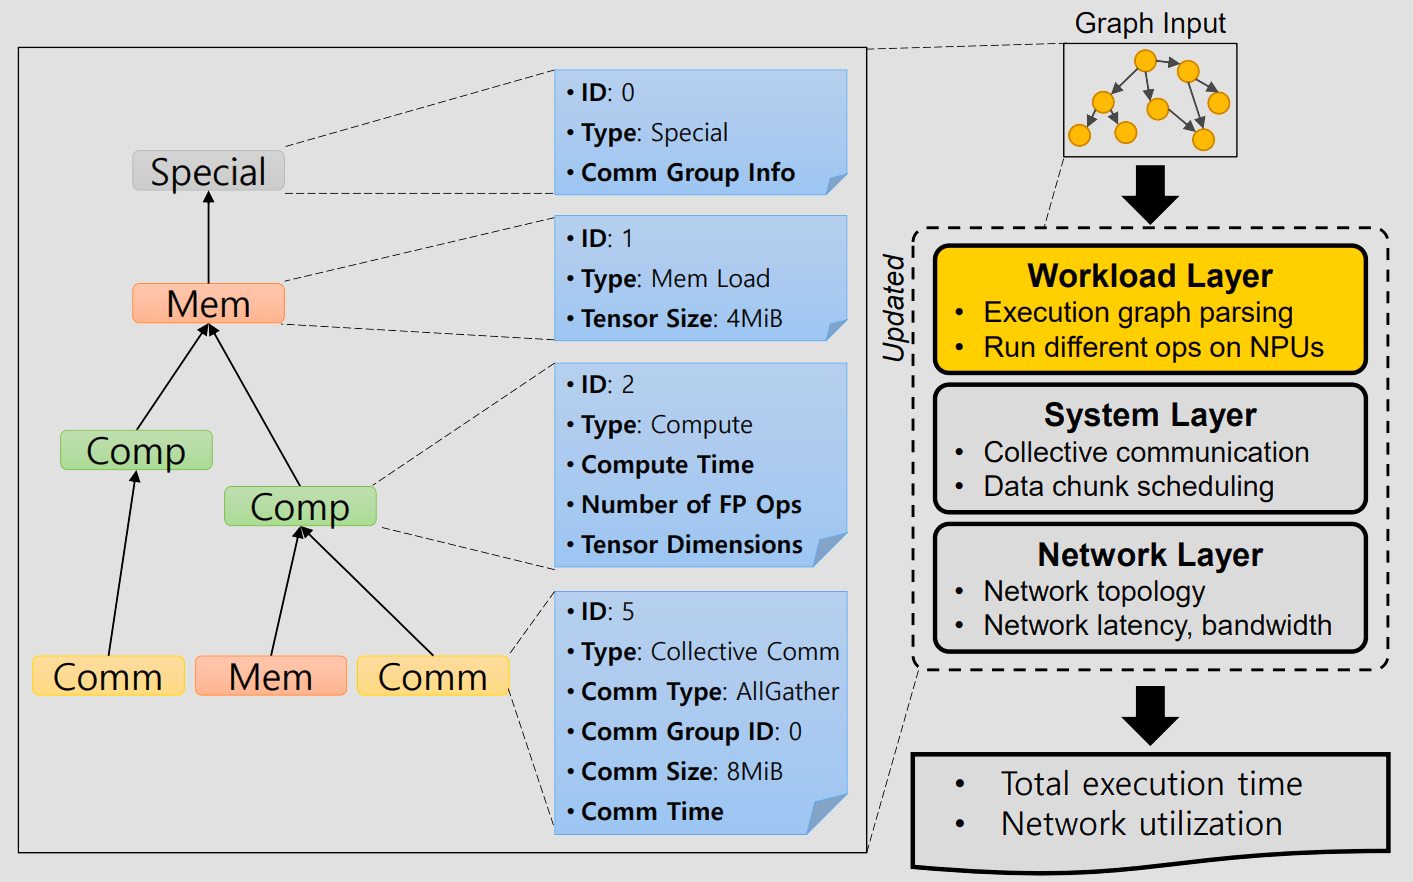 Workload Layer Overview